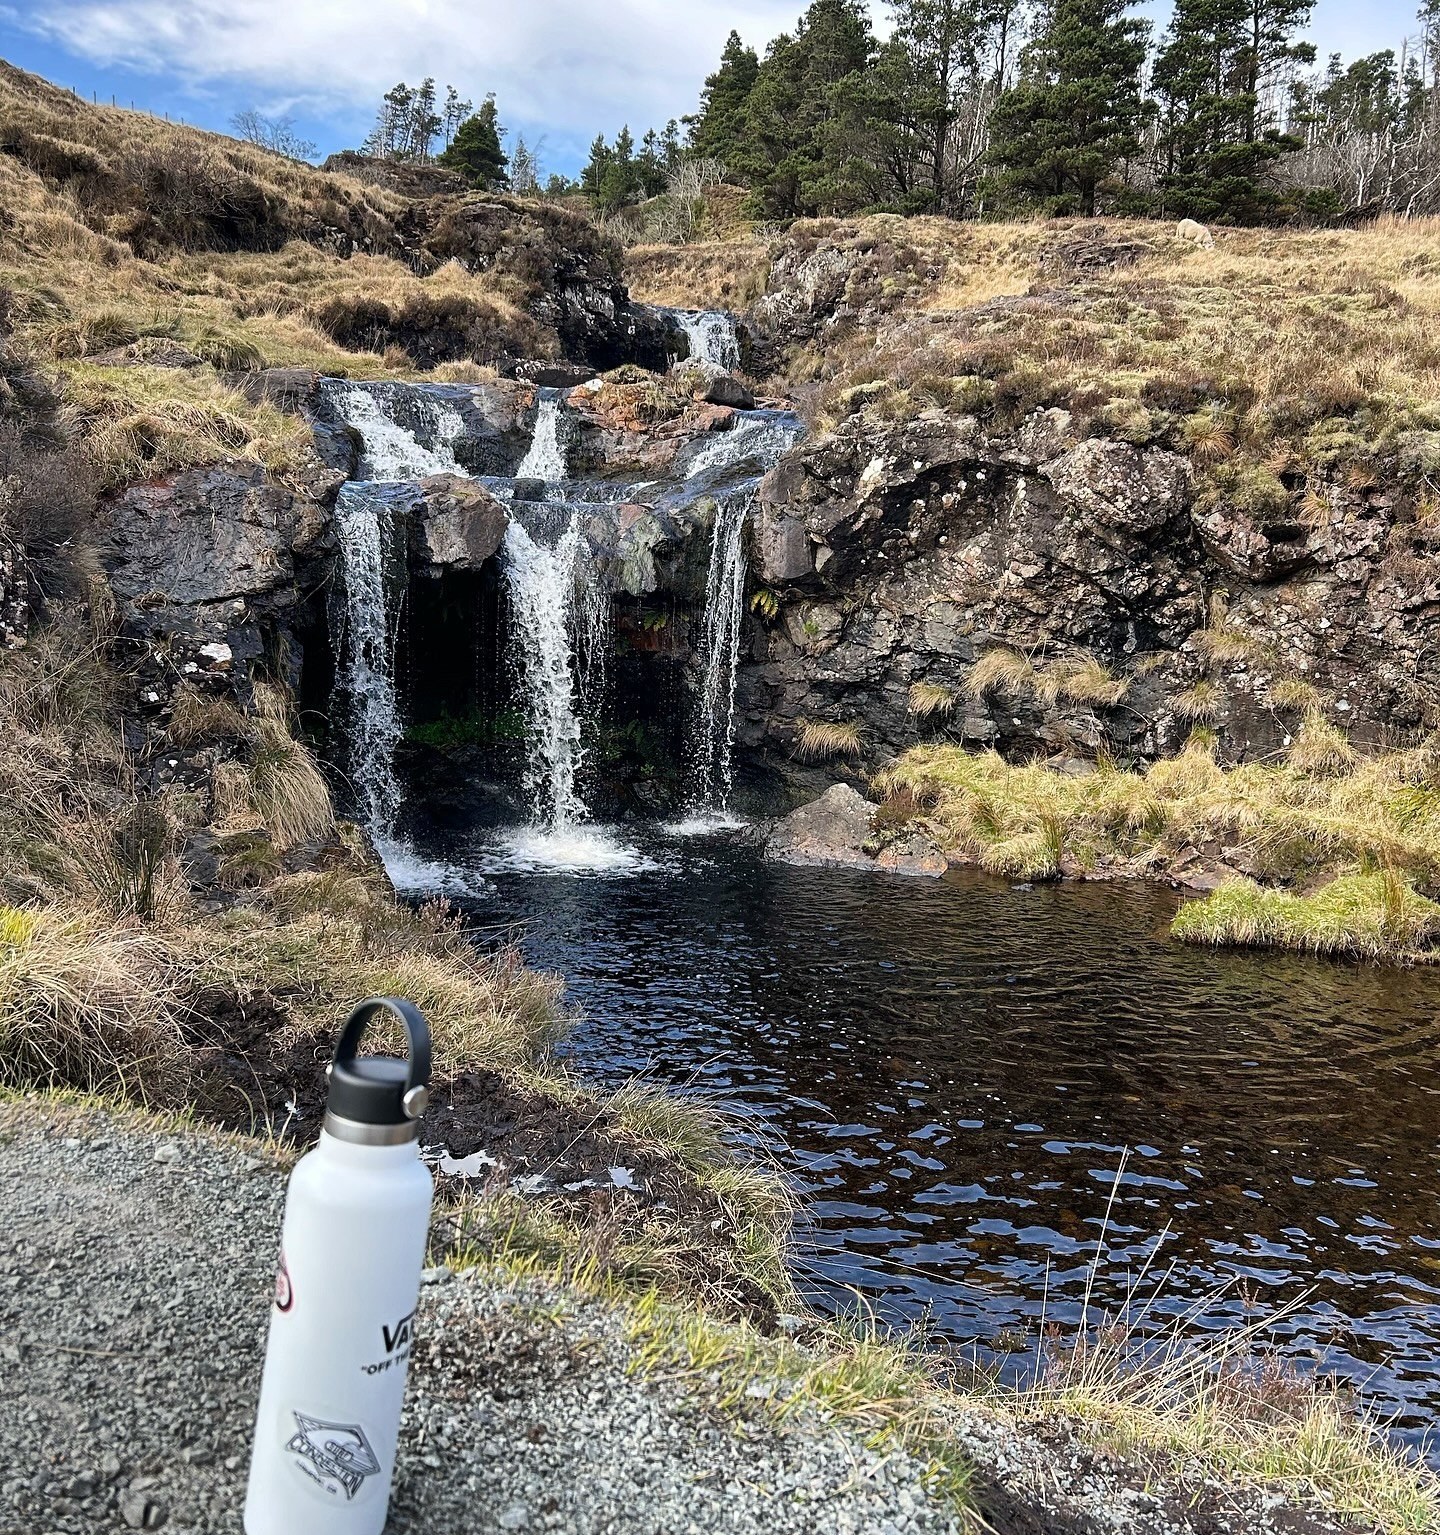 Are fairies and mermaids related? Asking for a friend 😉🧜&zwj;♀️🧚🏻&zwj;♀️ Thanks for taking us along! #travelingtuesday #travelingwithfriends #fairypools #scotland